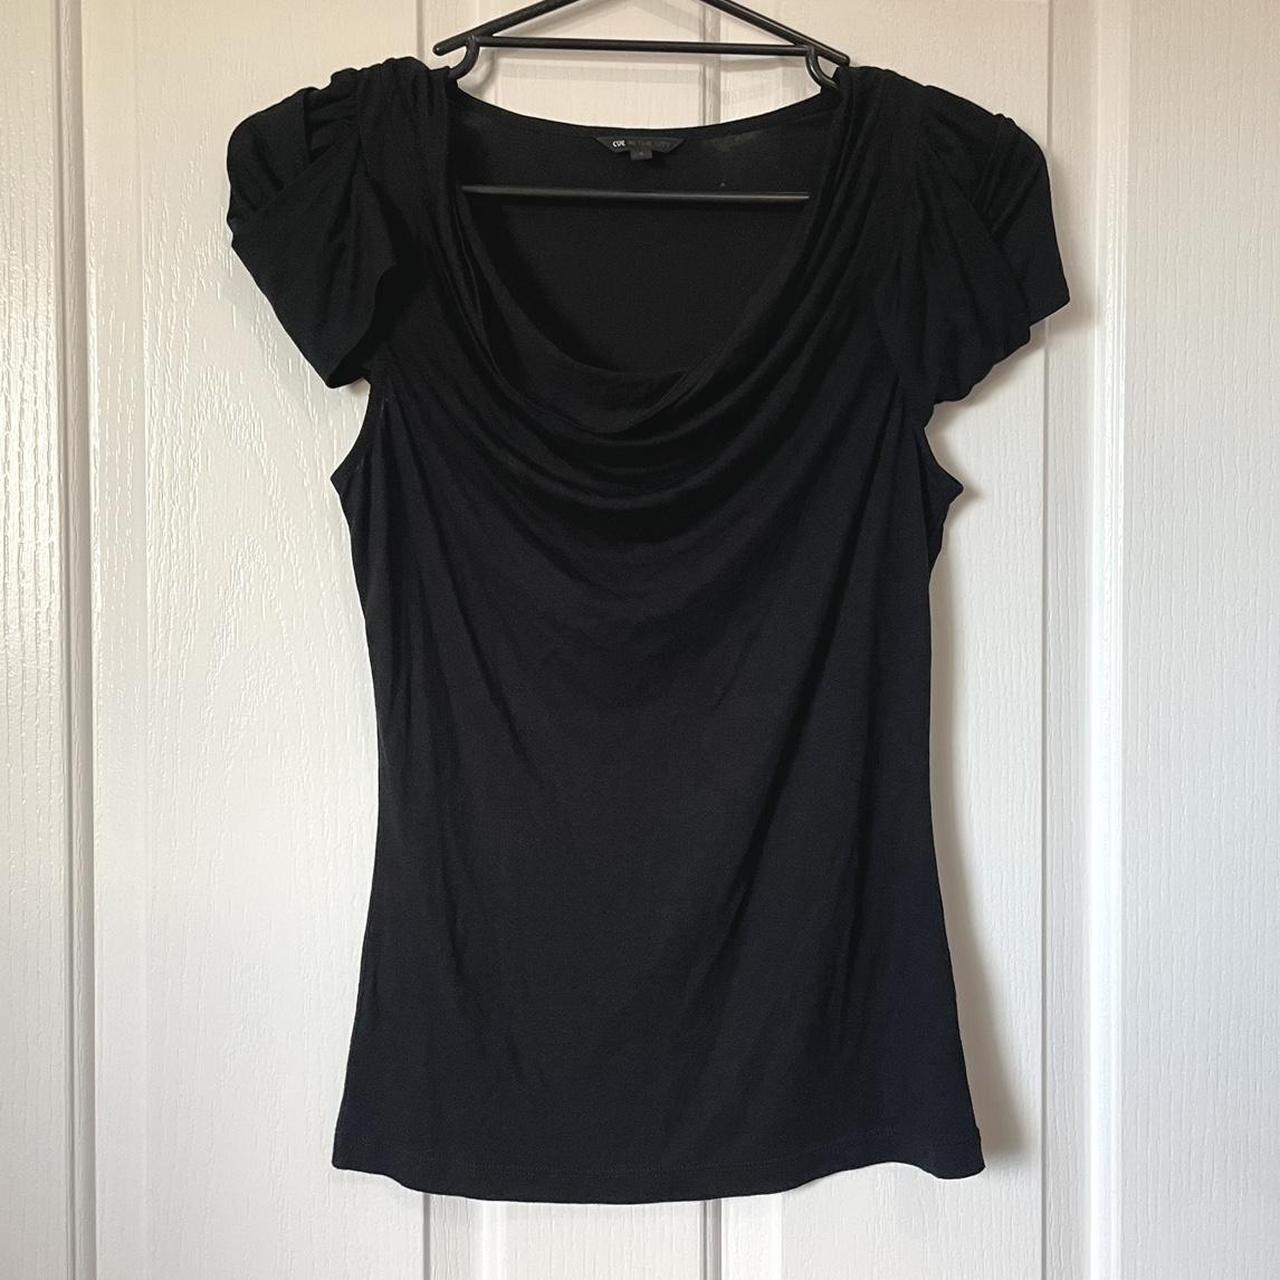 Cue In The City Black Top, S Great staple for work... - Depop